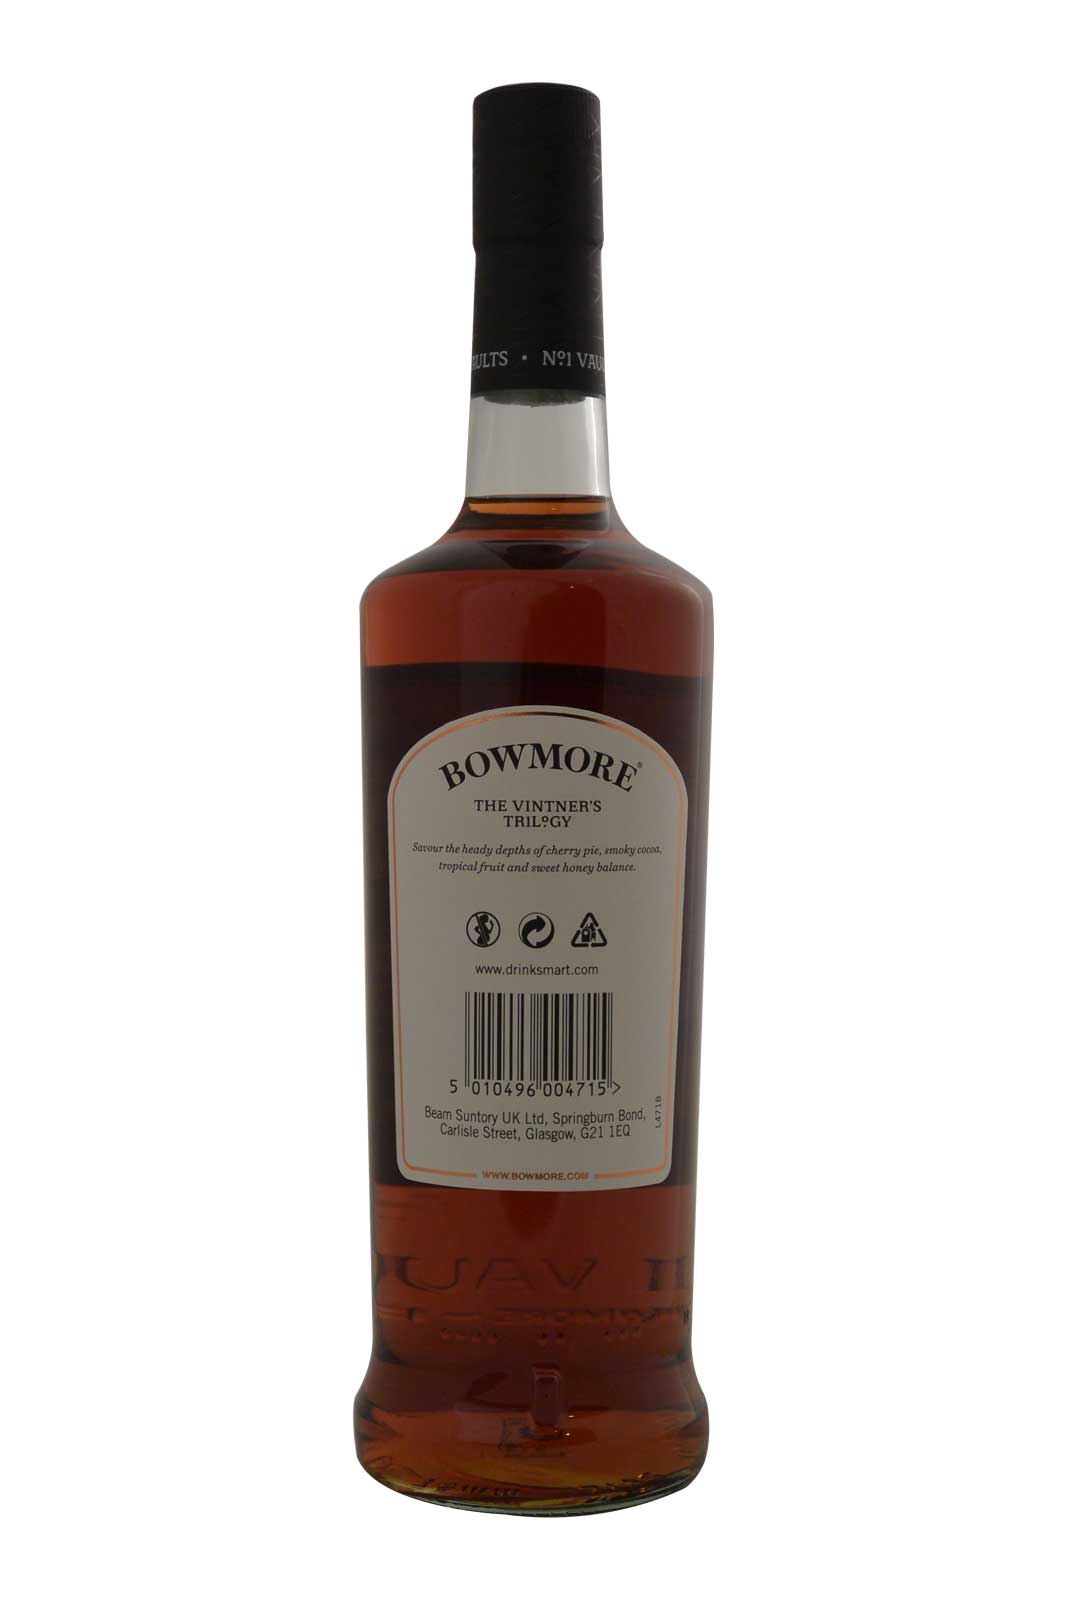 Bowmore 26 Year Old French Oak Barrique - The Vintner's Trilogy